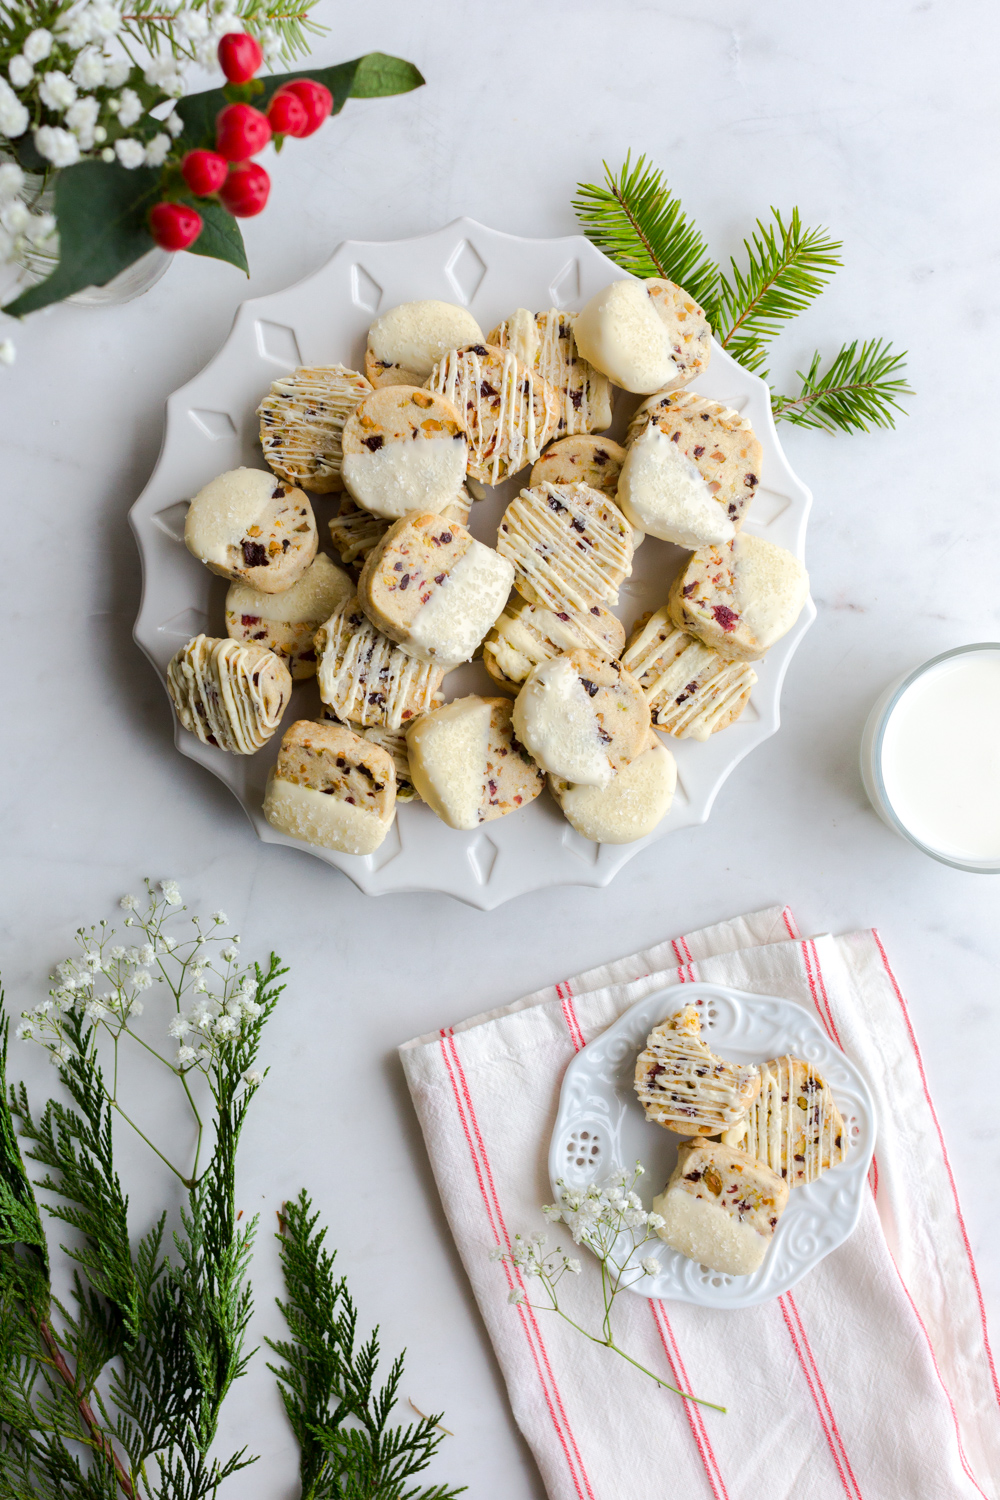 Plate of Cherry Pistachio and White Chocolate Shortbread Cookies